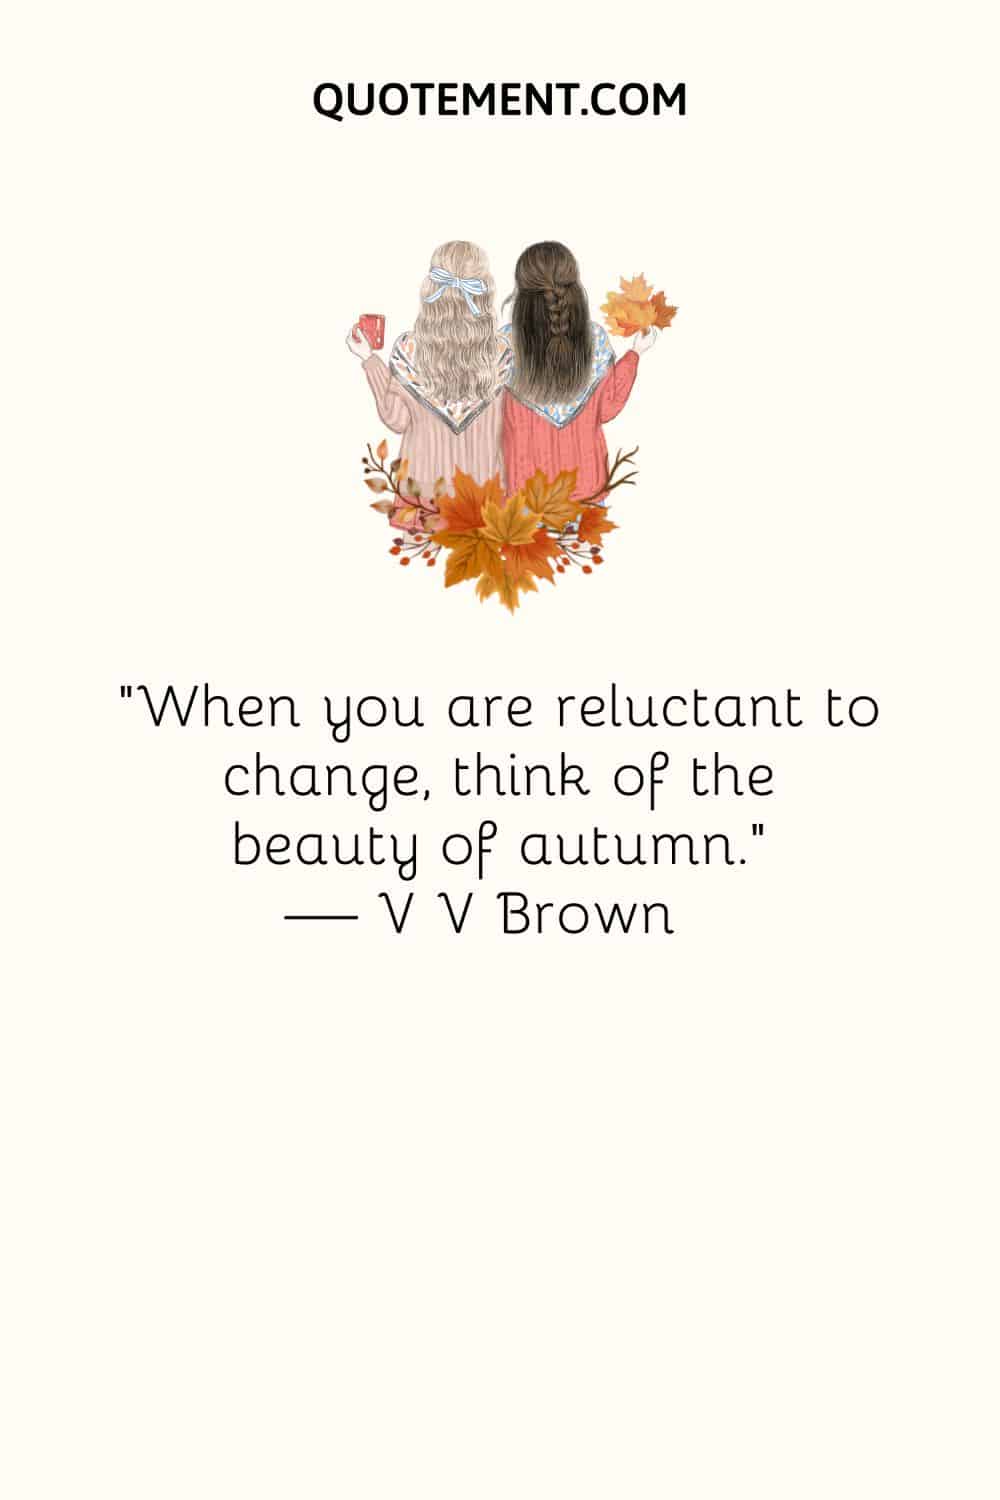 “When you are reluctant to change, think of the beauty of autumn.” — V V Brown